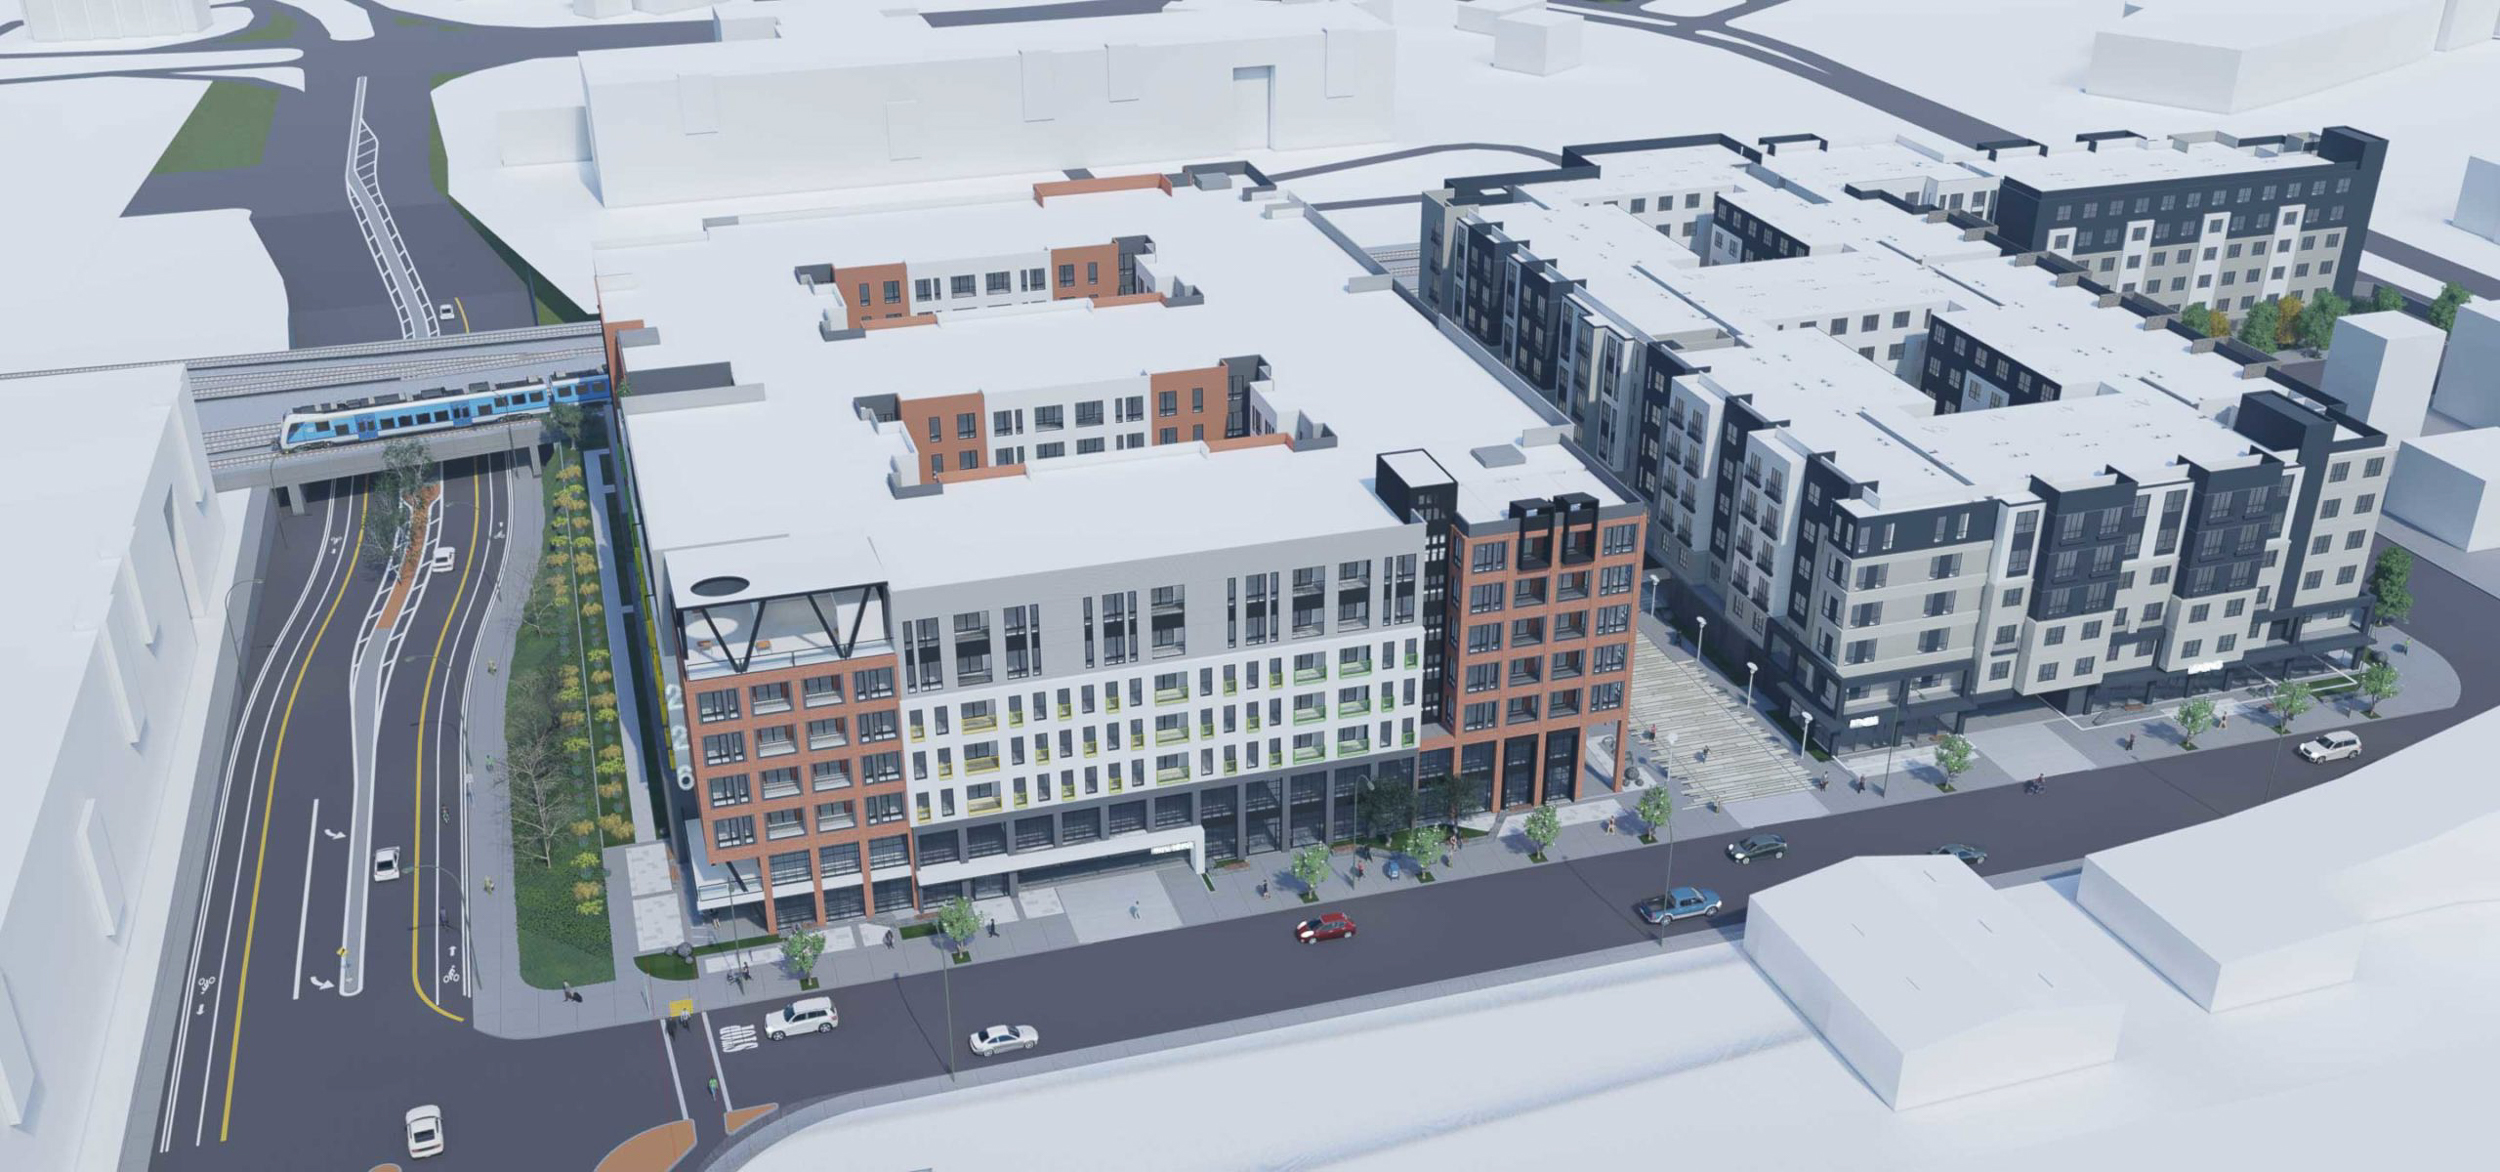 244 McEvoy Street proposal, aerial view rendering by Architects Orange